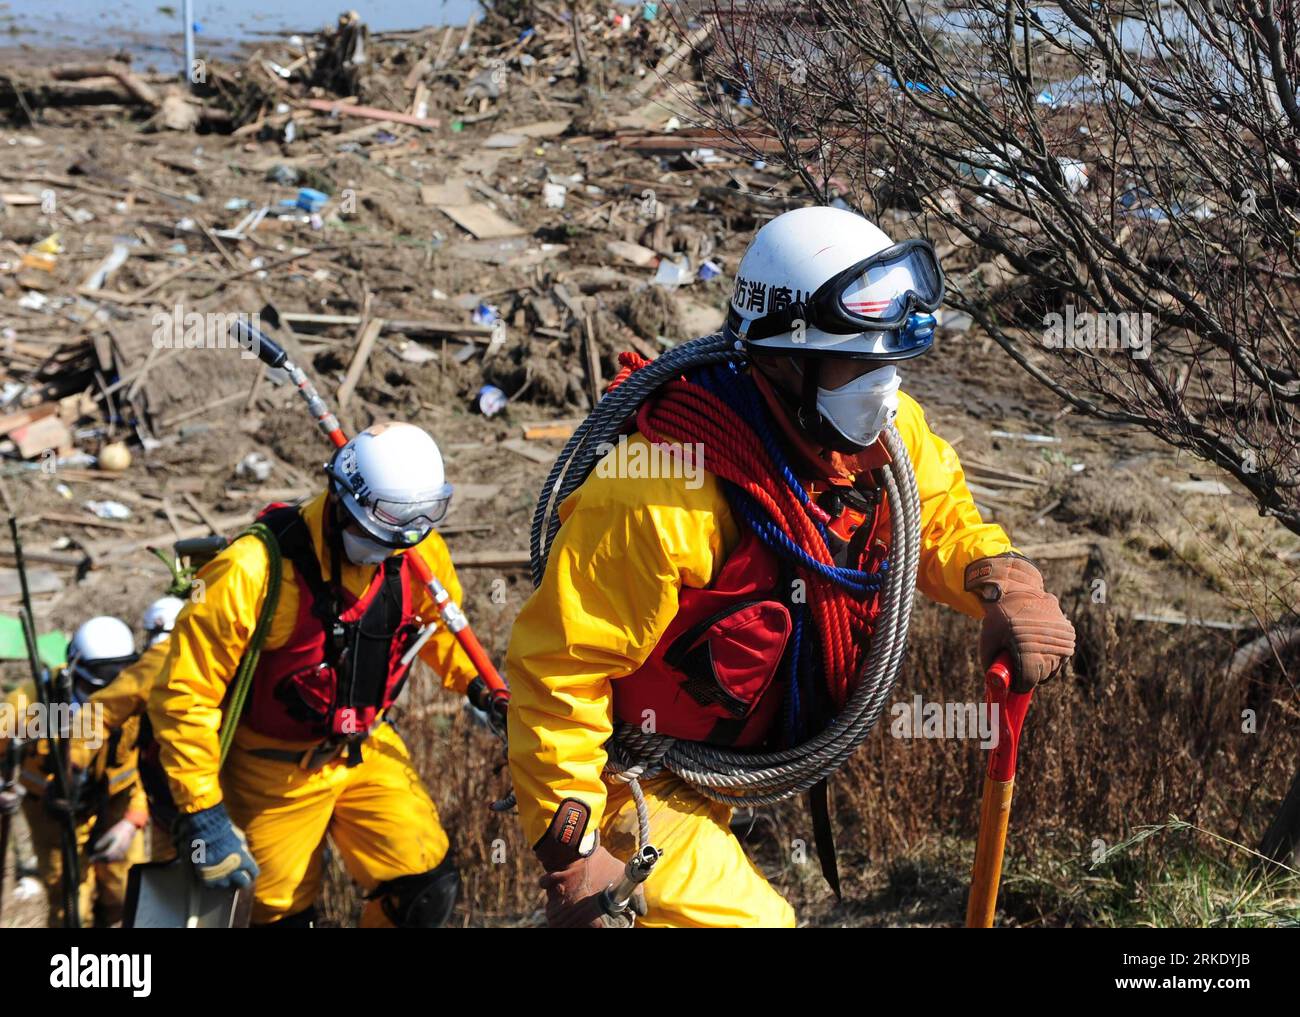 Bildnummer: 55019316  Datum: 13.03.2011  Copyright: imago/Xinhua SENDAI, March 13, 2011 (Xinhua) -- Rescuers work at Sanbontsuka of Wakabayashi in Sendai City, Miyagi Prefecture, Japan, March 13, 2011. The area lost contact with the outside world after Friday s quake and tsunami. Friday s catastrophic earthquake in Japan and the following devastating tsunami have ravaged the country, while massive rescue and recovery efforts have been quickly launched to save lives and minimize losses. (Xinhua/Ji Chunpeng)(yc) JAPAN-QUAKE PUBLICATIONxNOTxINxCHN Gesellschaft Naturkatastrophe Erdbeben Tsunami kb Stock Photo